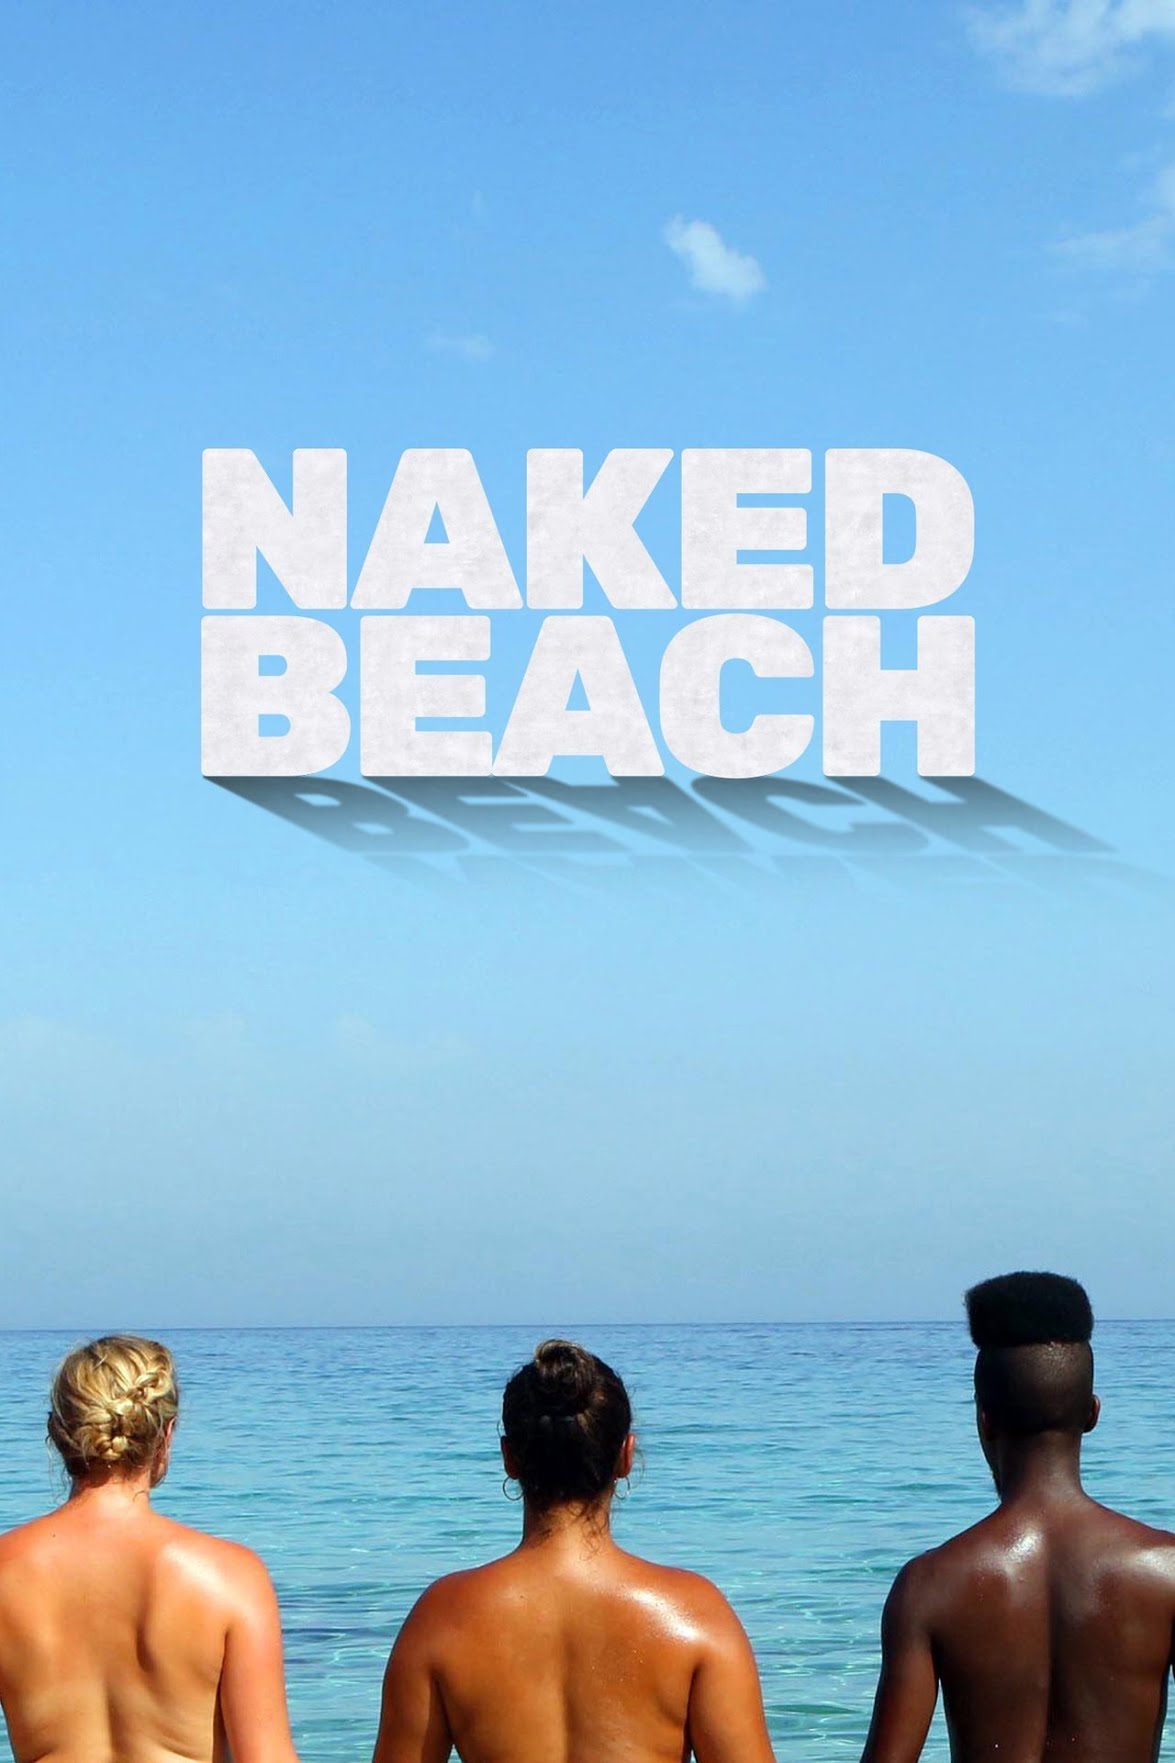 Naked Beach Channel 4 naked stories